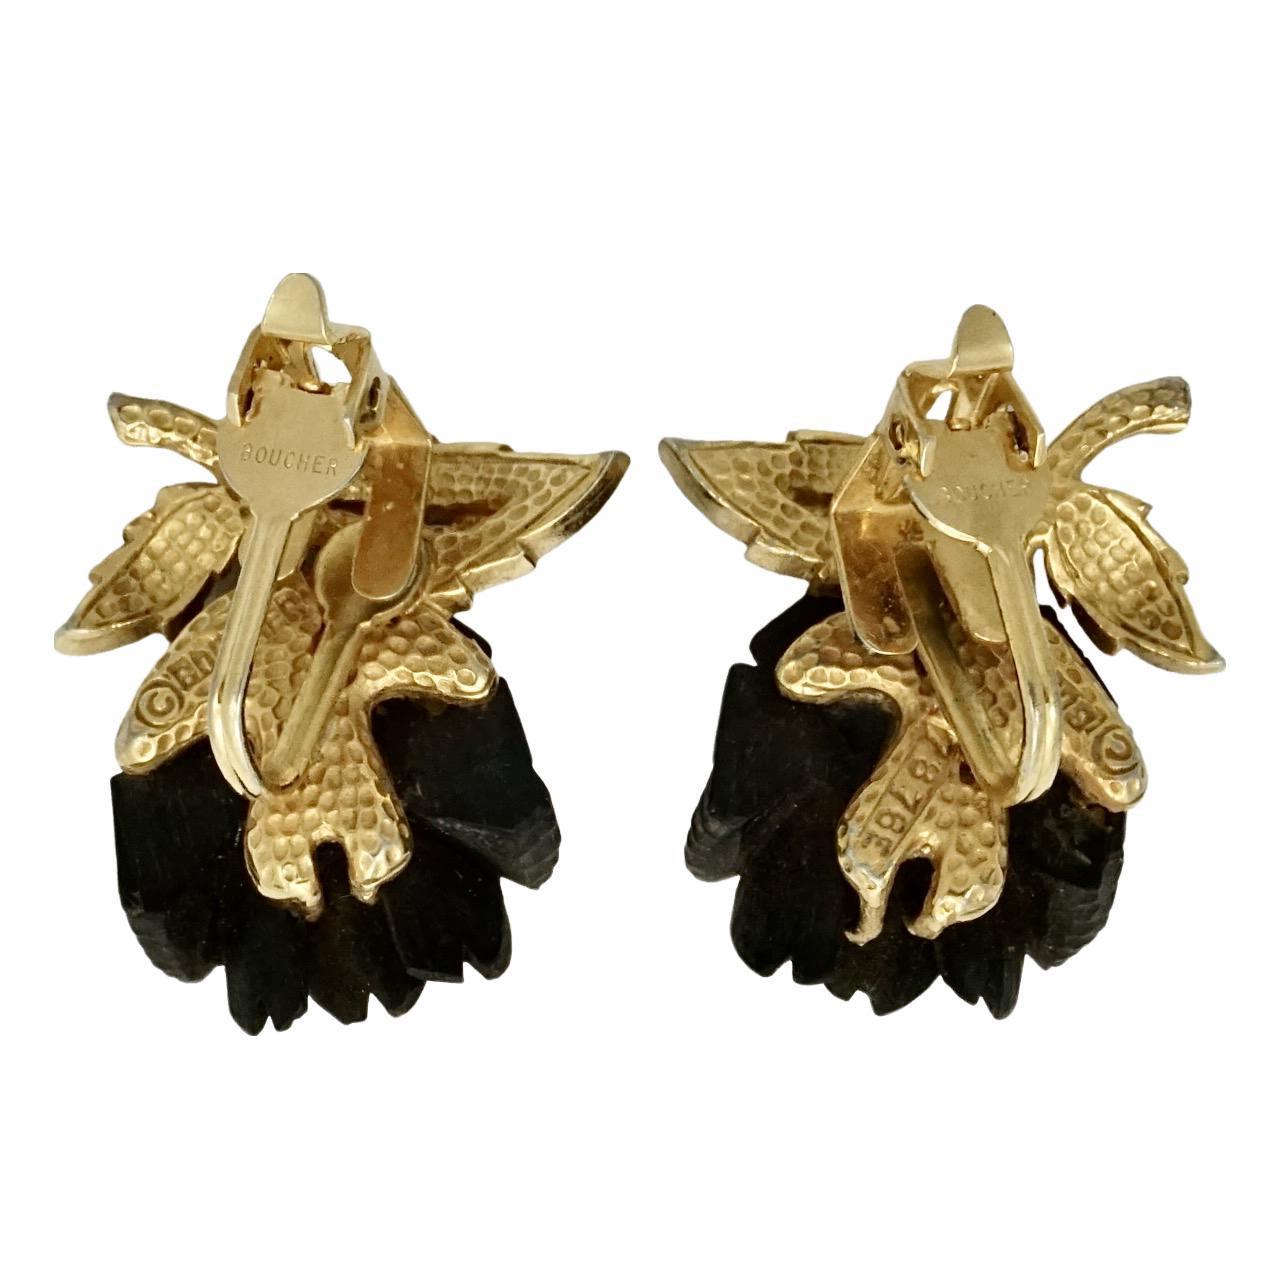 Marcel Boucher beautiful gold plated clip on earrings, featuring black roses. Measuring length 2.8 cm / 1.1 inches by width 2.3 cm / .9 inch. Possibly the clip fitting is not original.

This is a beautiful pair of black rose earrings by Boucher.